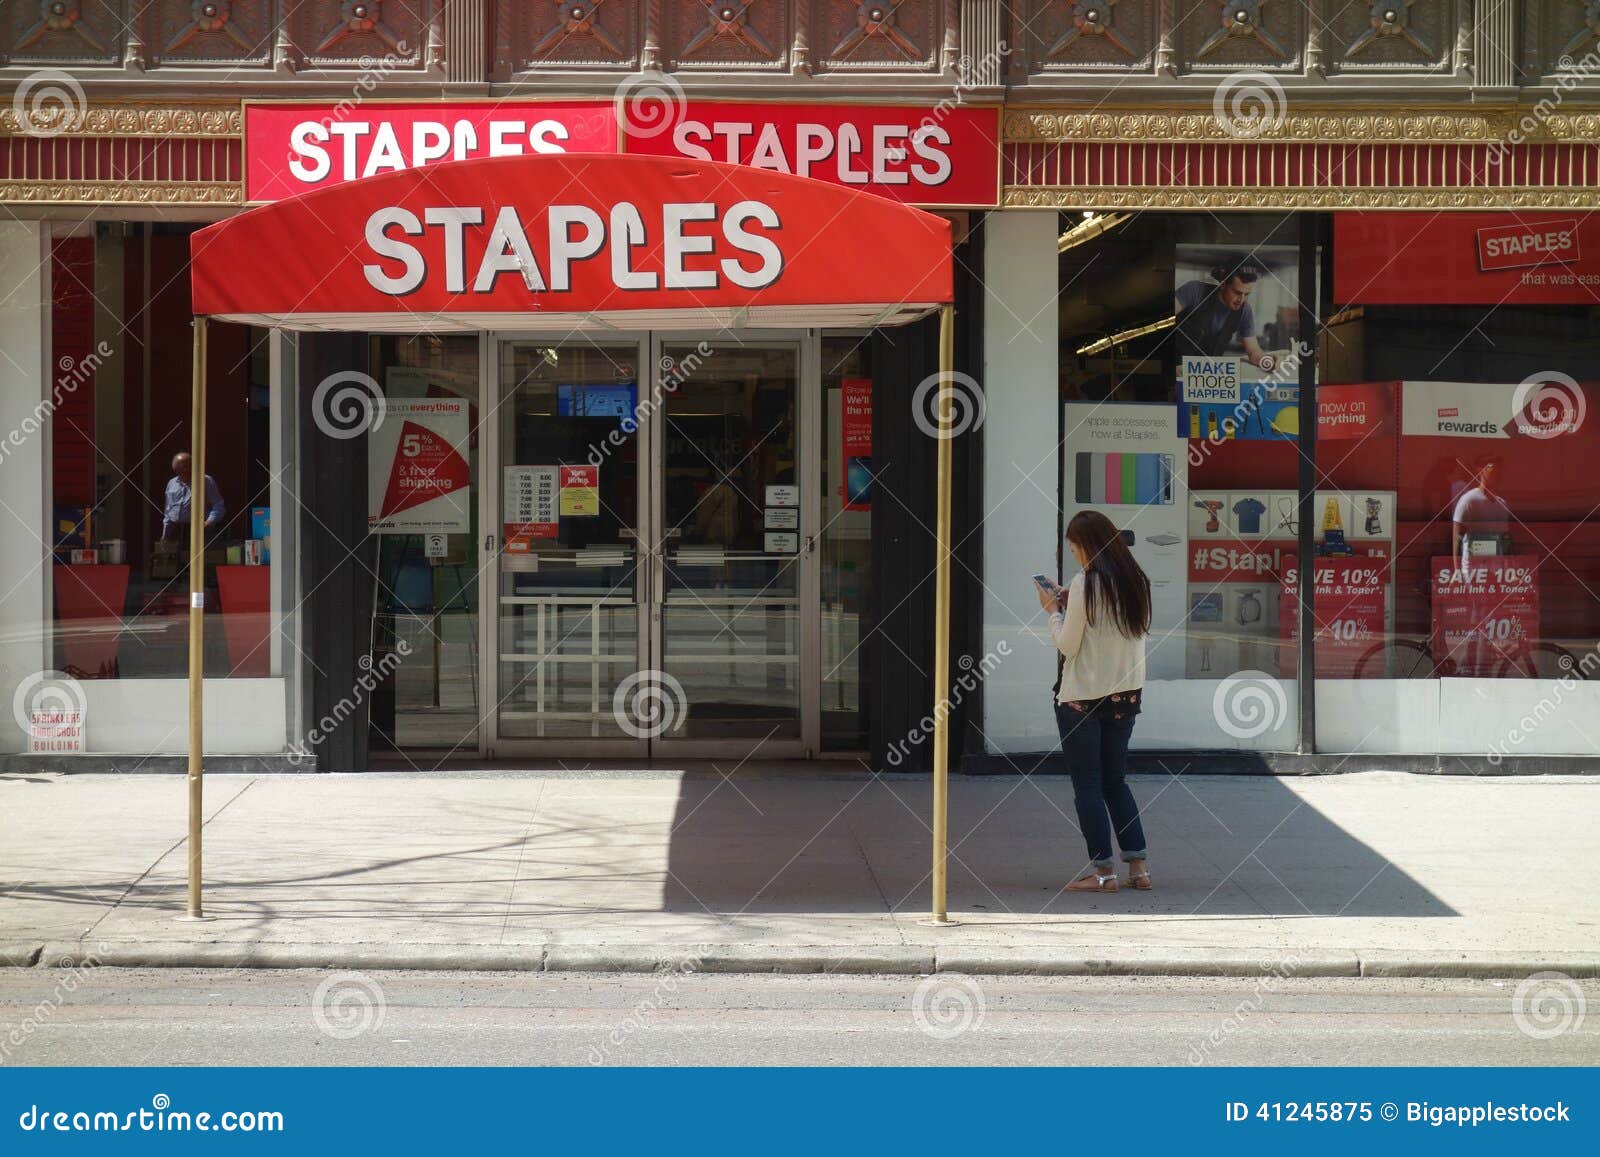 Staples Store West Th Street Midtown Manhattan Inc Office Supply Chain Over Stores Countries 41245875 